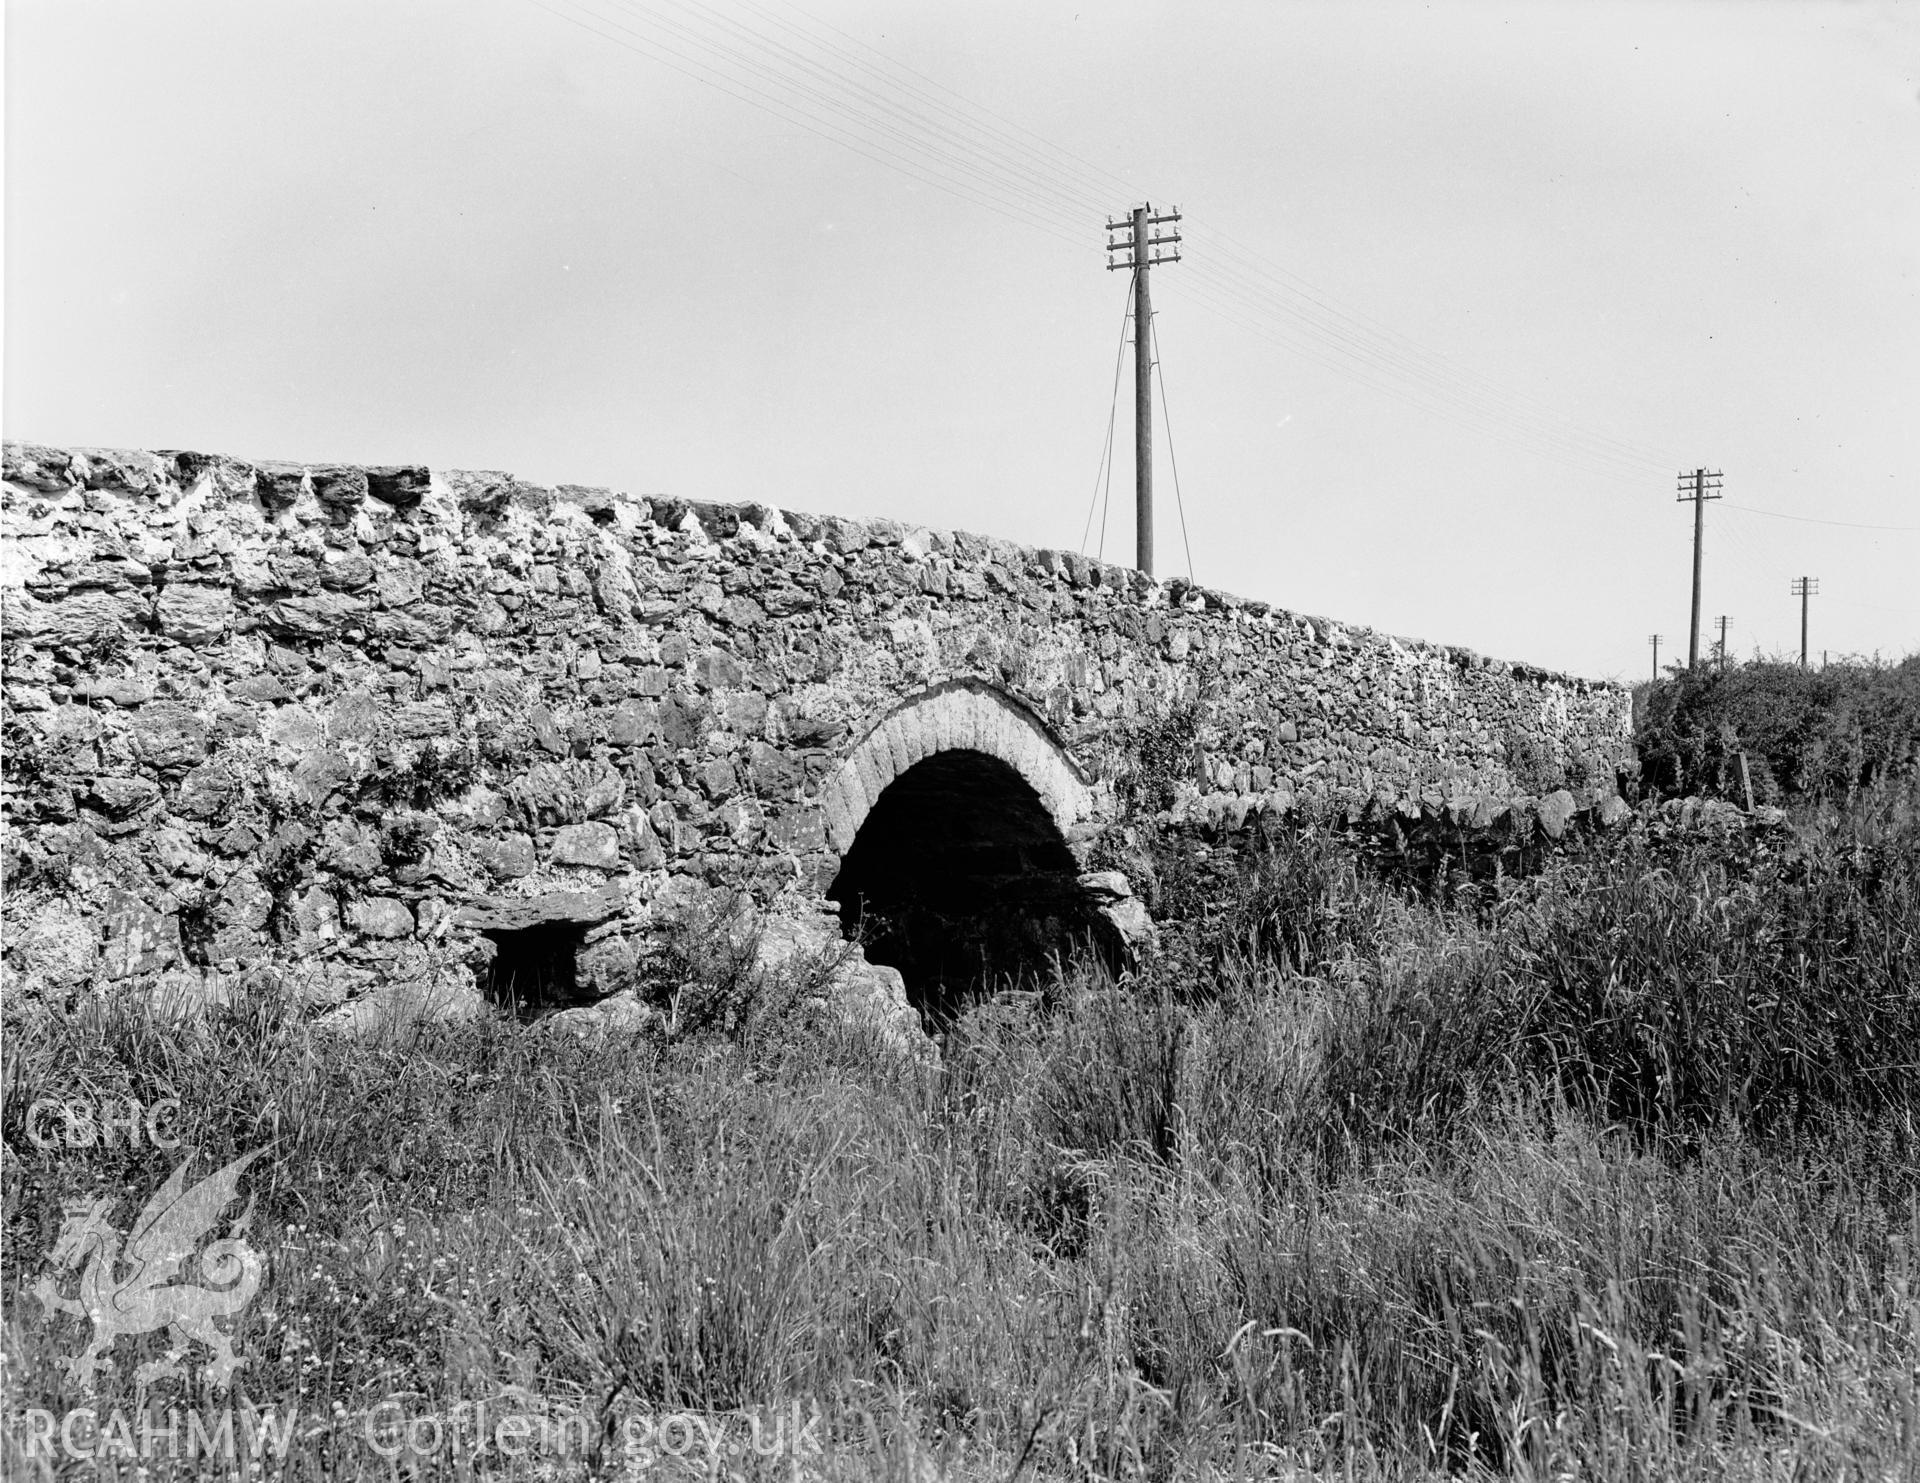 View of South side - earlier arch